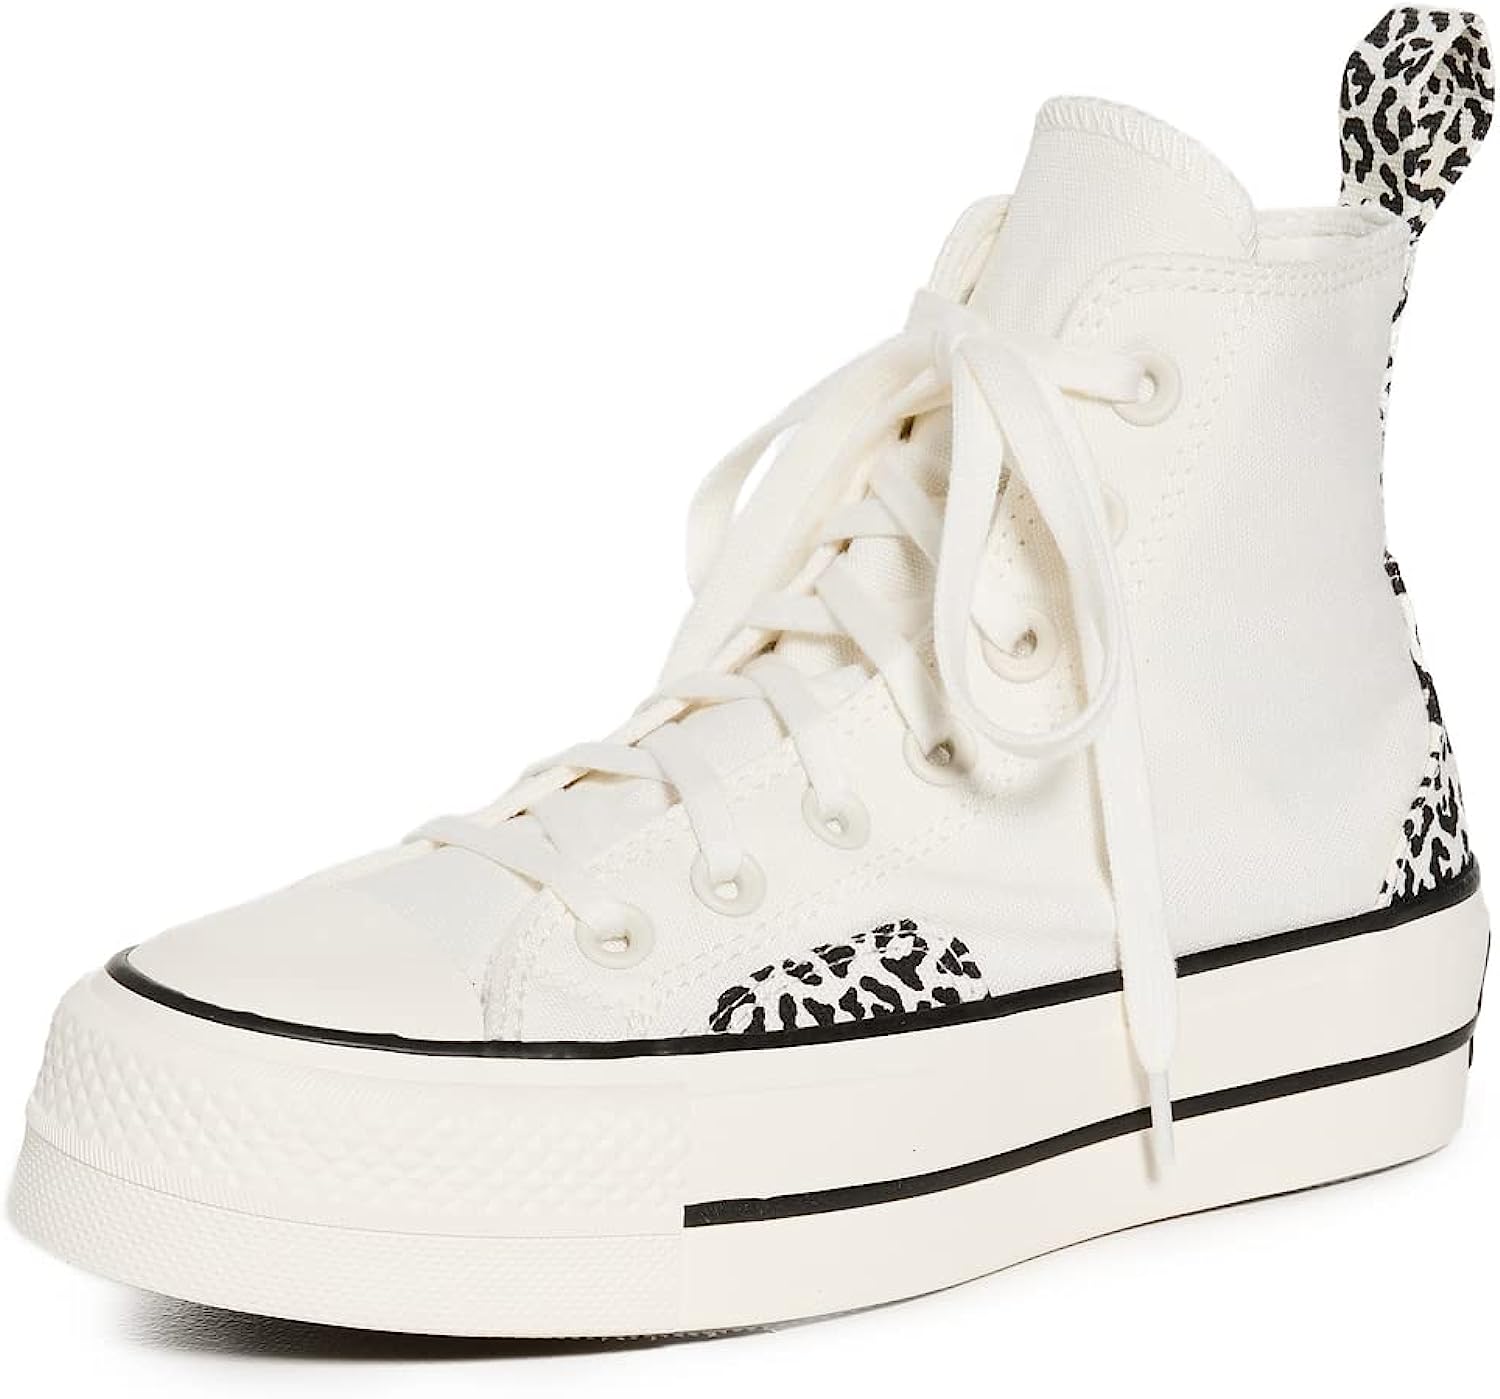 Converse Women's Chuck Taylor All Star Lift Sneakers